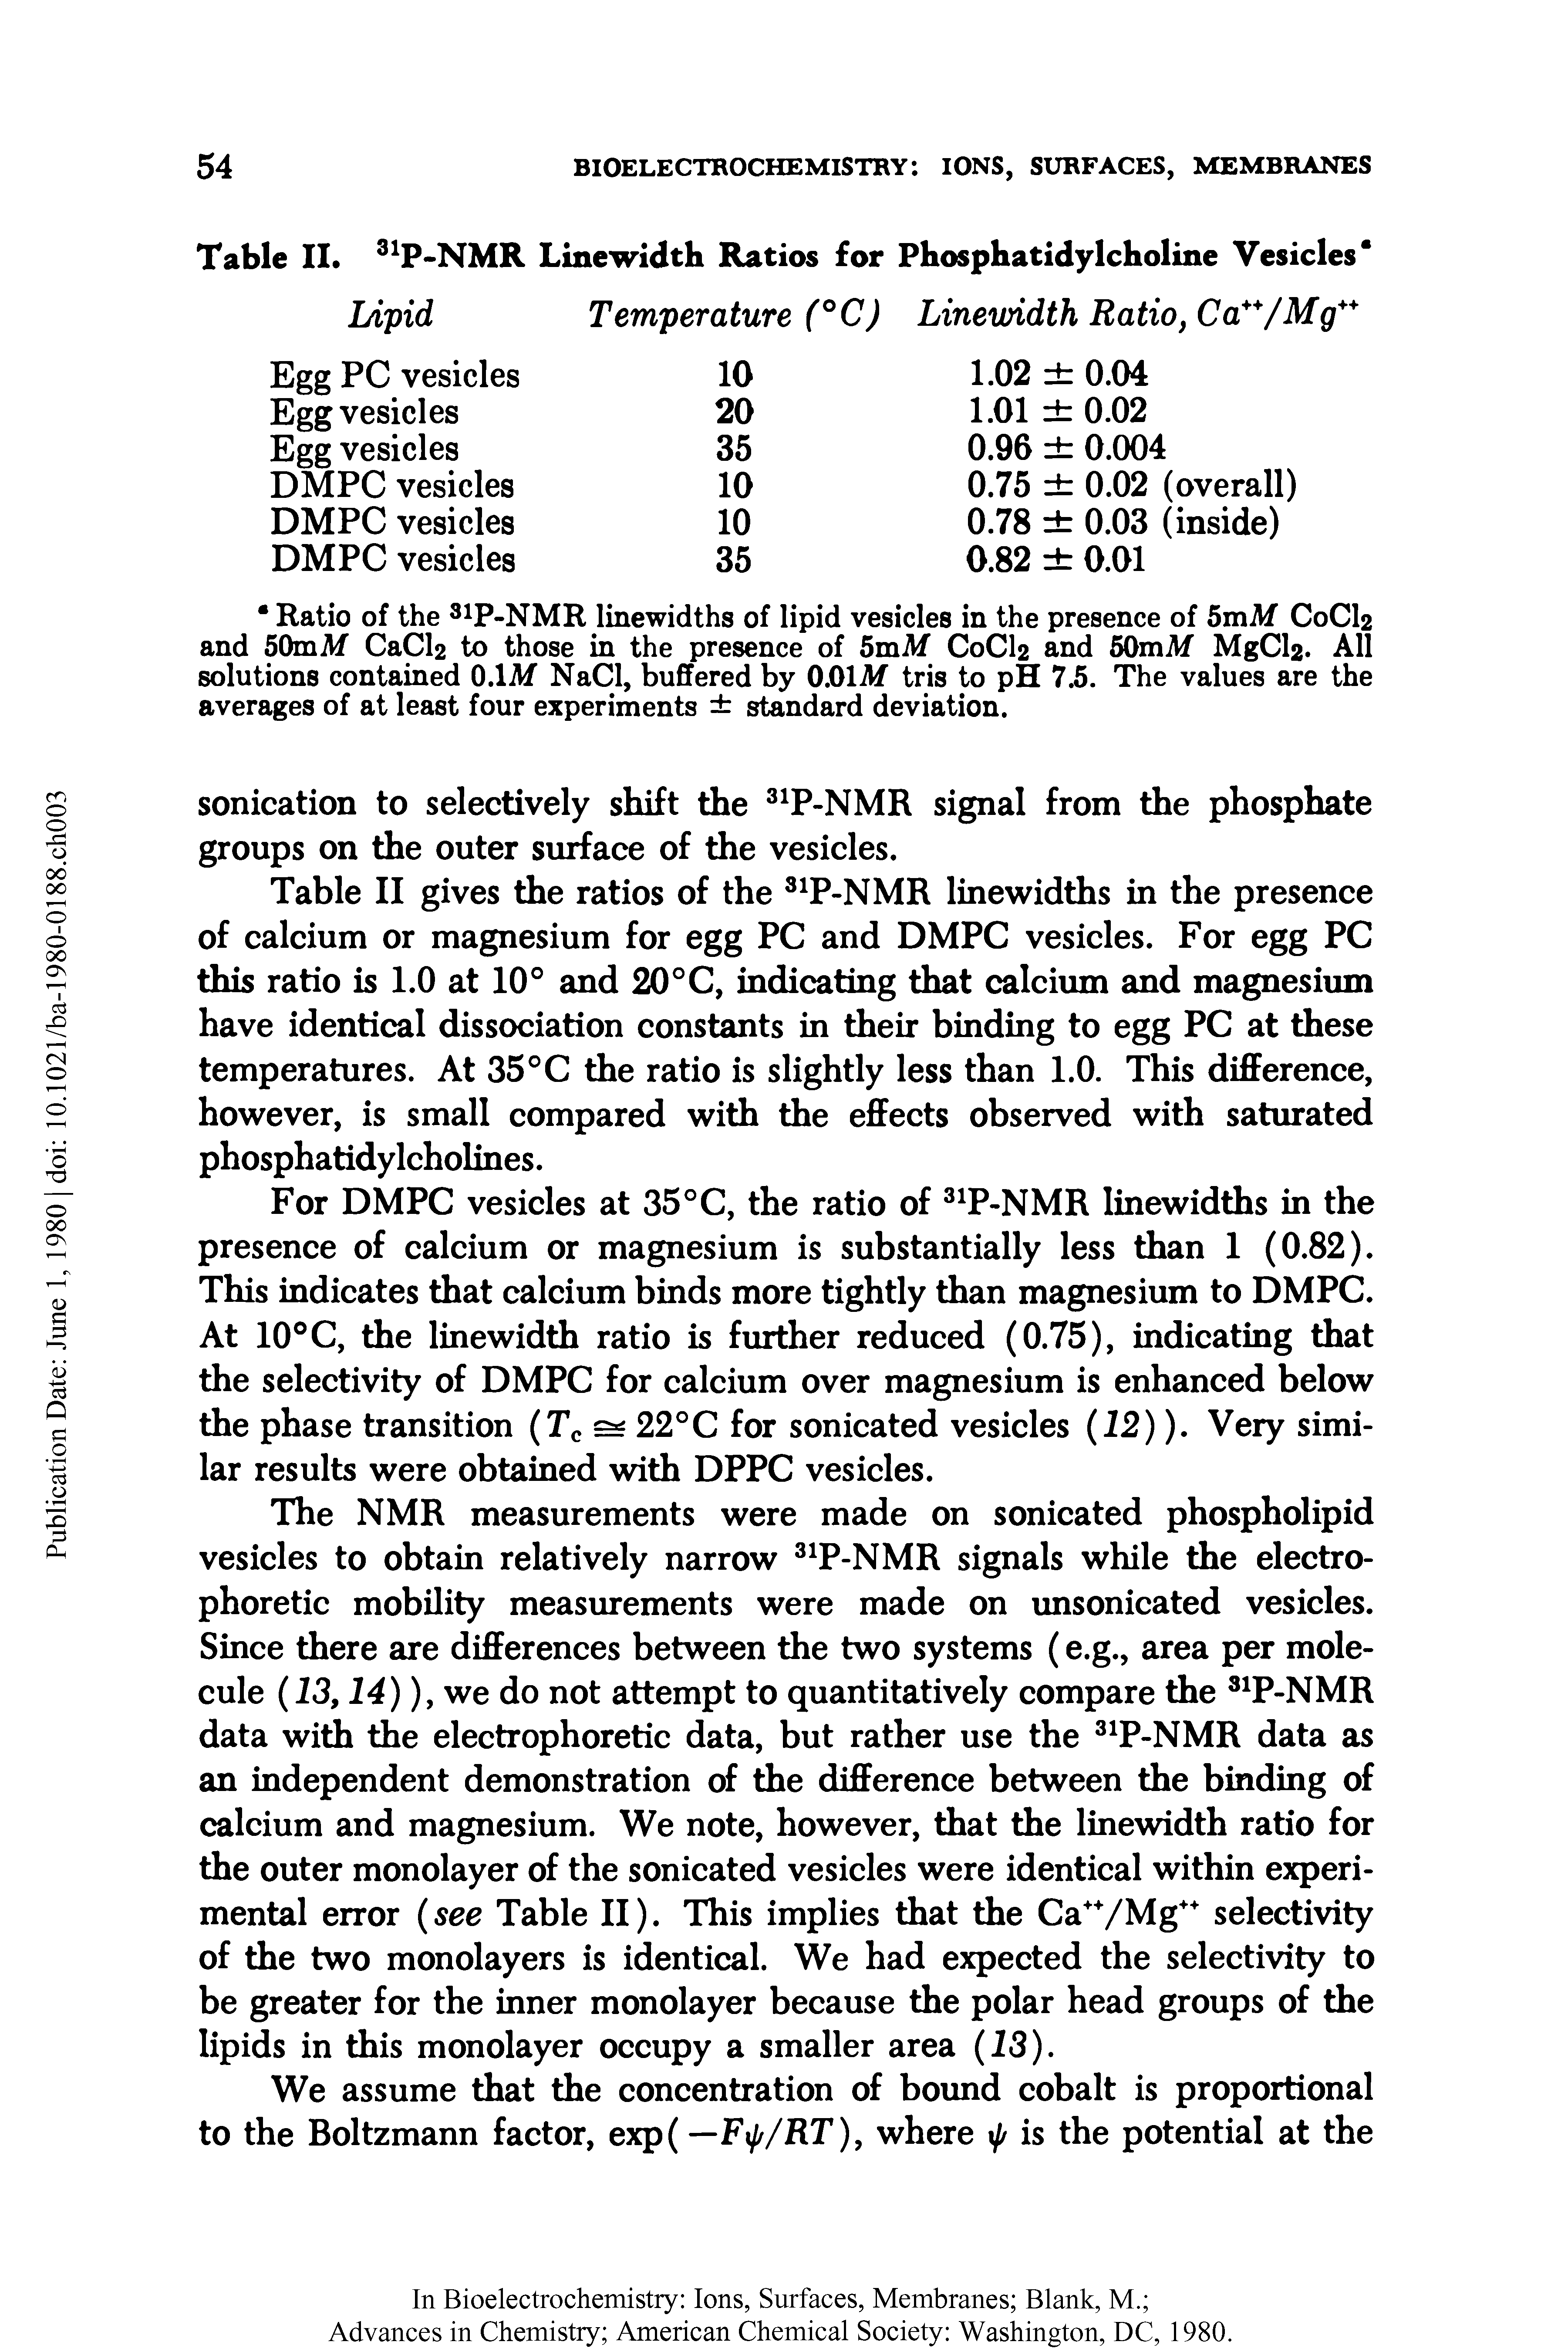 Table II gives the ratios of the 31P-NMR linewidths in the presence of calcium or magnesium for egg PC and DMPC vesicles. For egg PC this ratio is 1.0 at 10° and 20°C, indicating that calcium and magnesium have identical dissociation constants in their binding to egg PC at these temperatures. At 35°C the ratio is slightly less than 1.0. This difference, however, is small compared with the effects observed with saturated phosphatidylcholines.